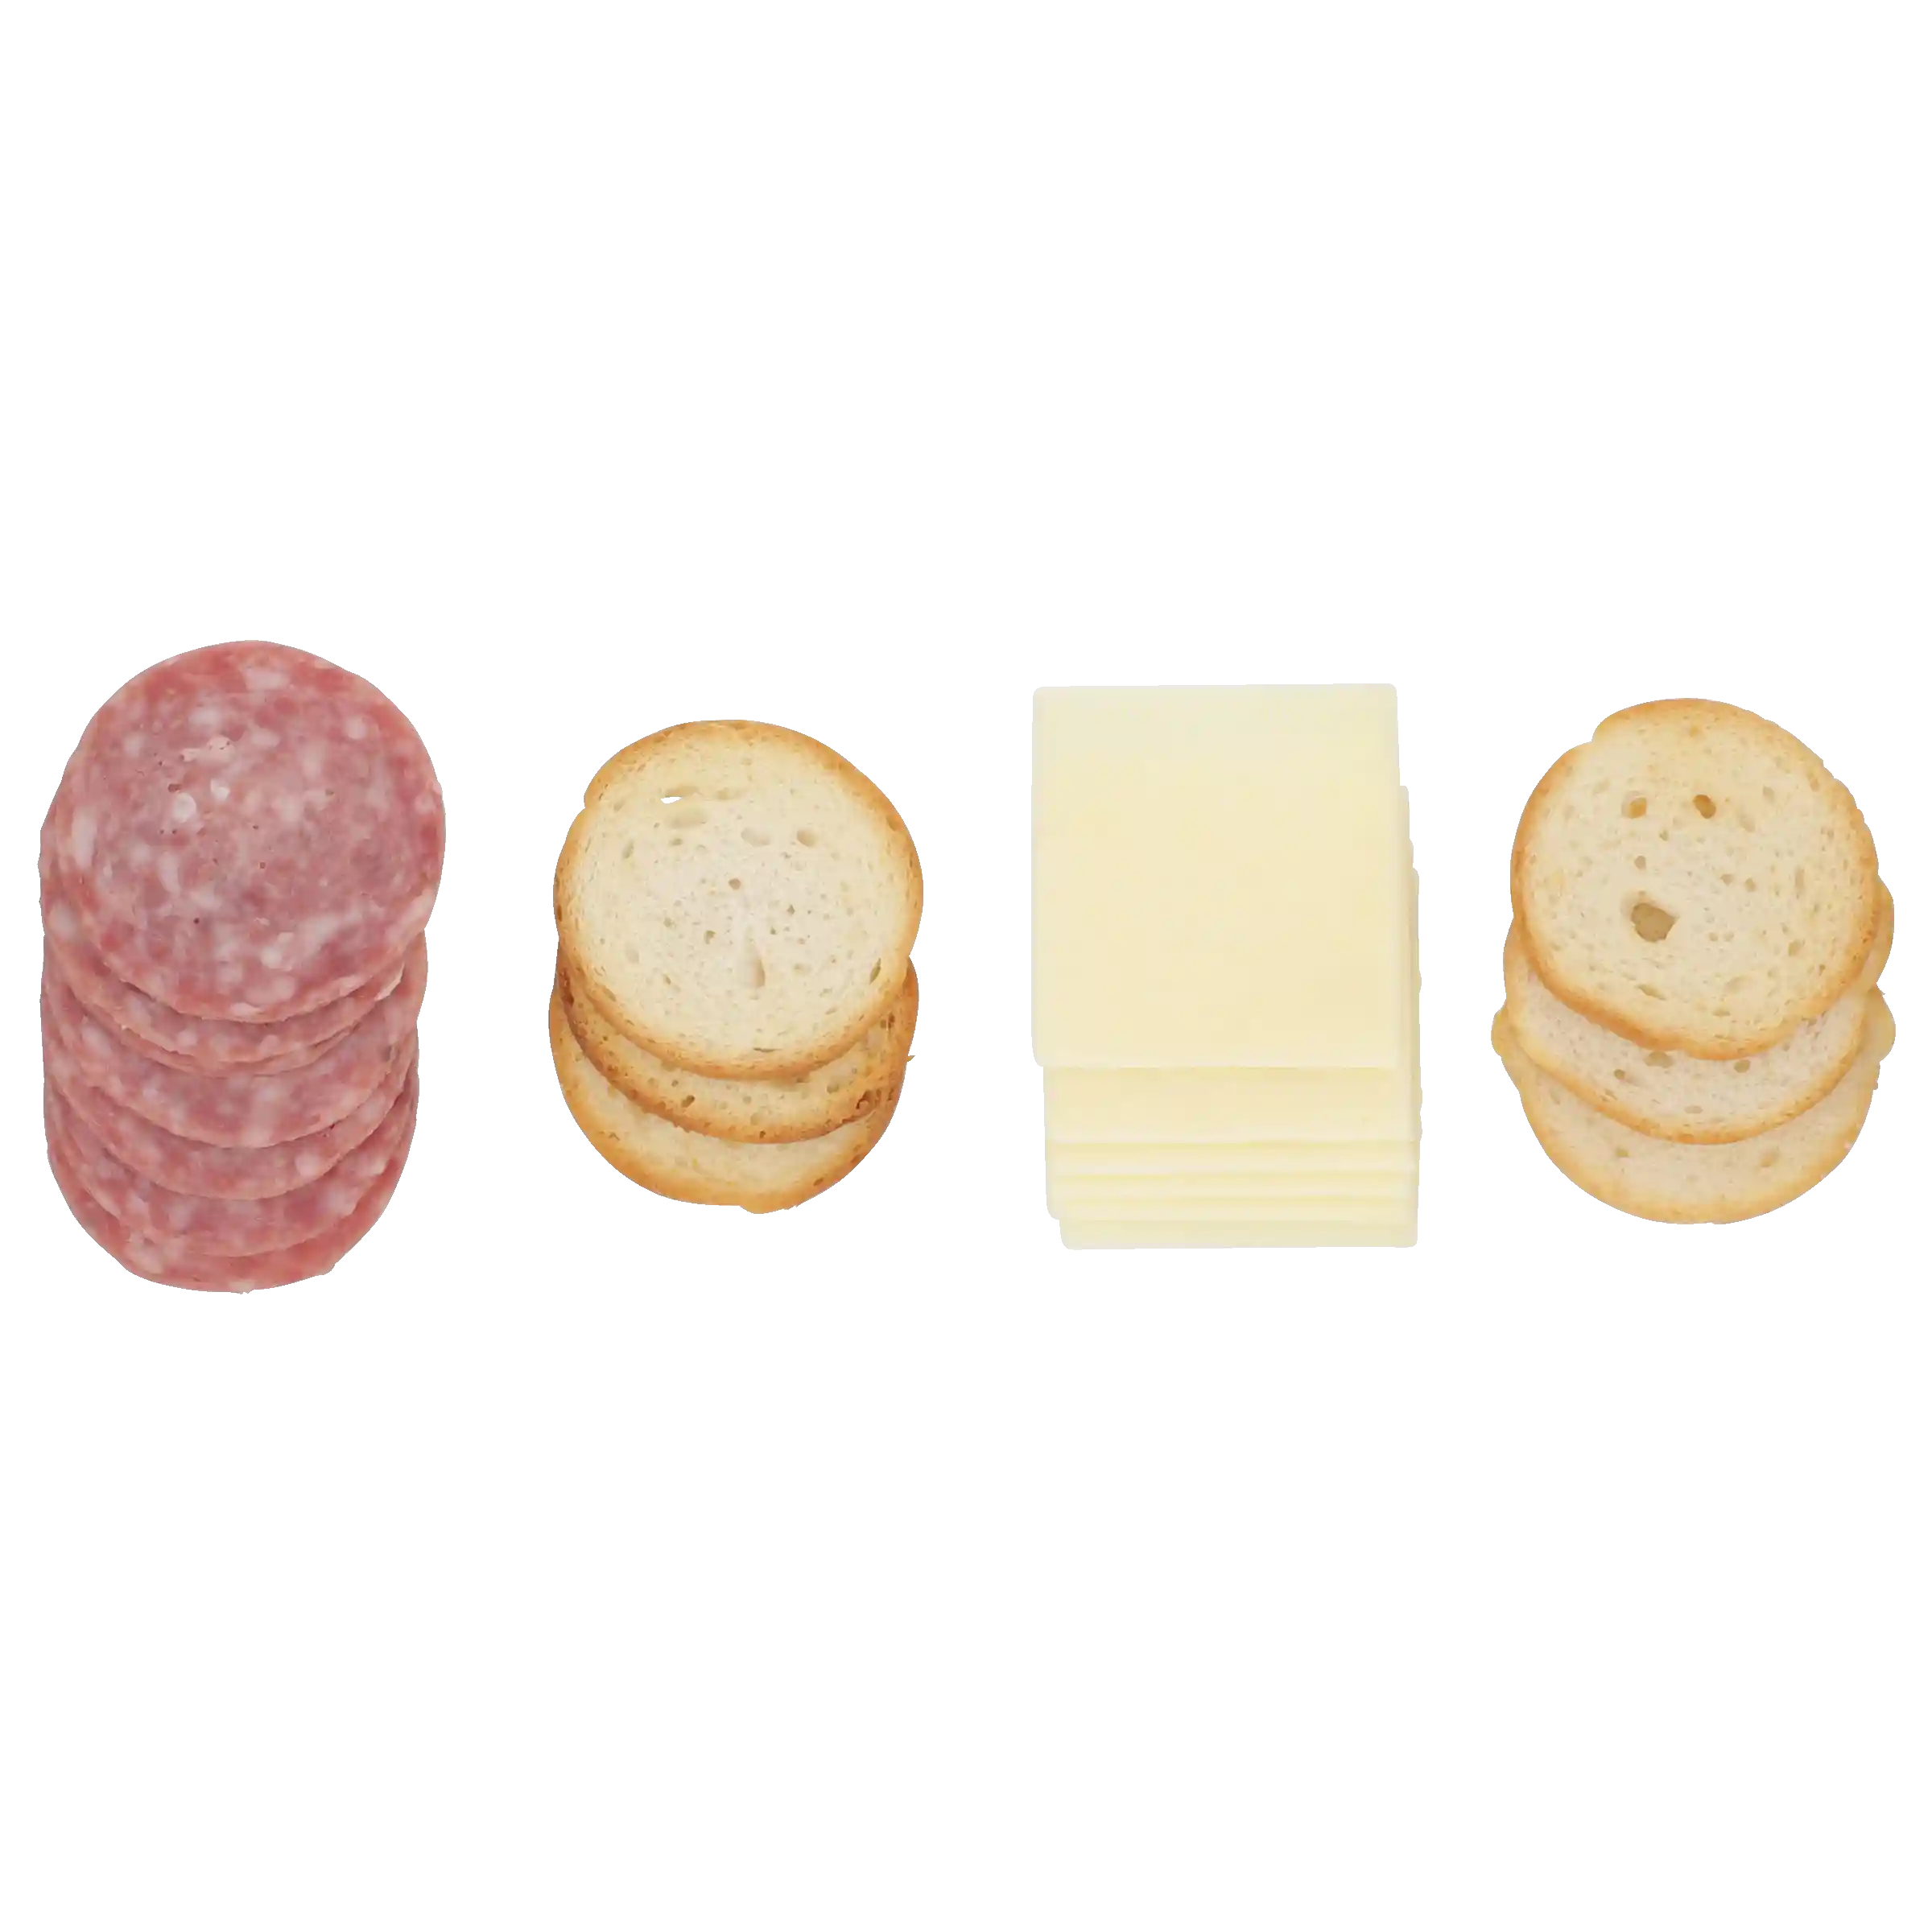 Hillshire® Snacking Small Plates, Genoa Salami Deli Lunch Meat and White Cheddar Cheese, 2.76 ozhttps://images.salsify.com/image/upload/s--Nq8-JGpX--/q_25/hwphsh9rryegq7jmuuti.webp